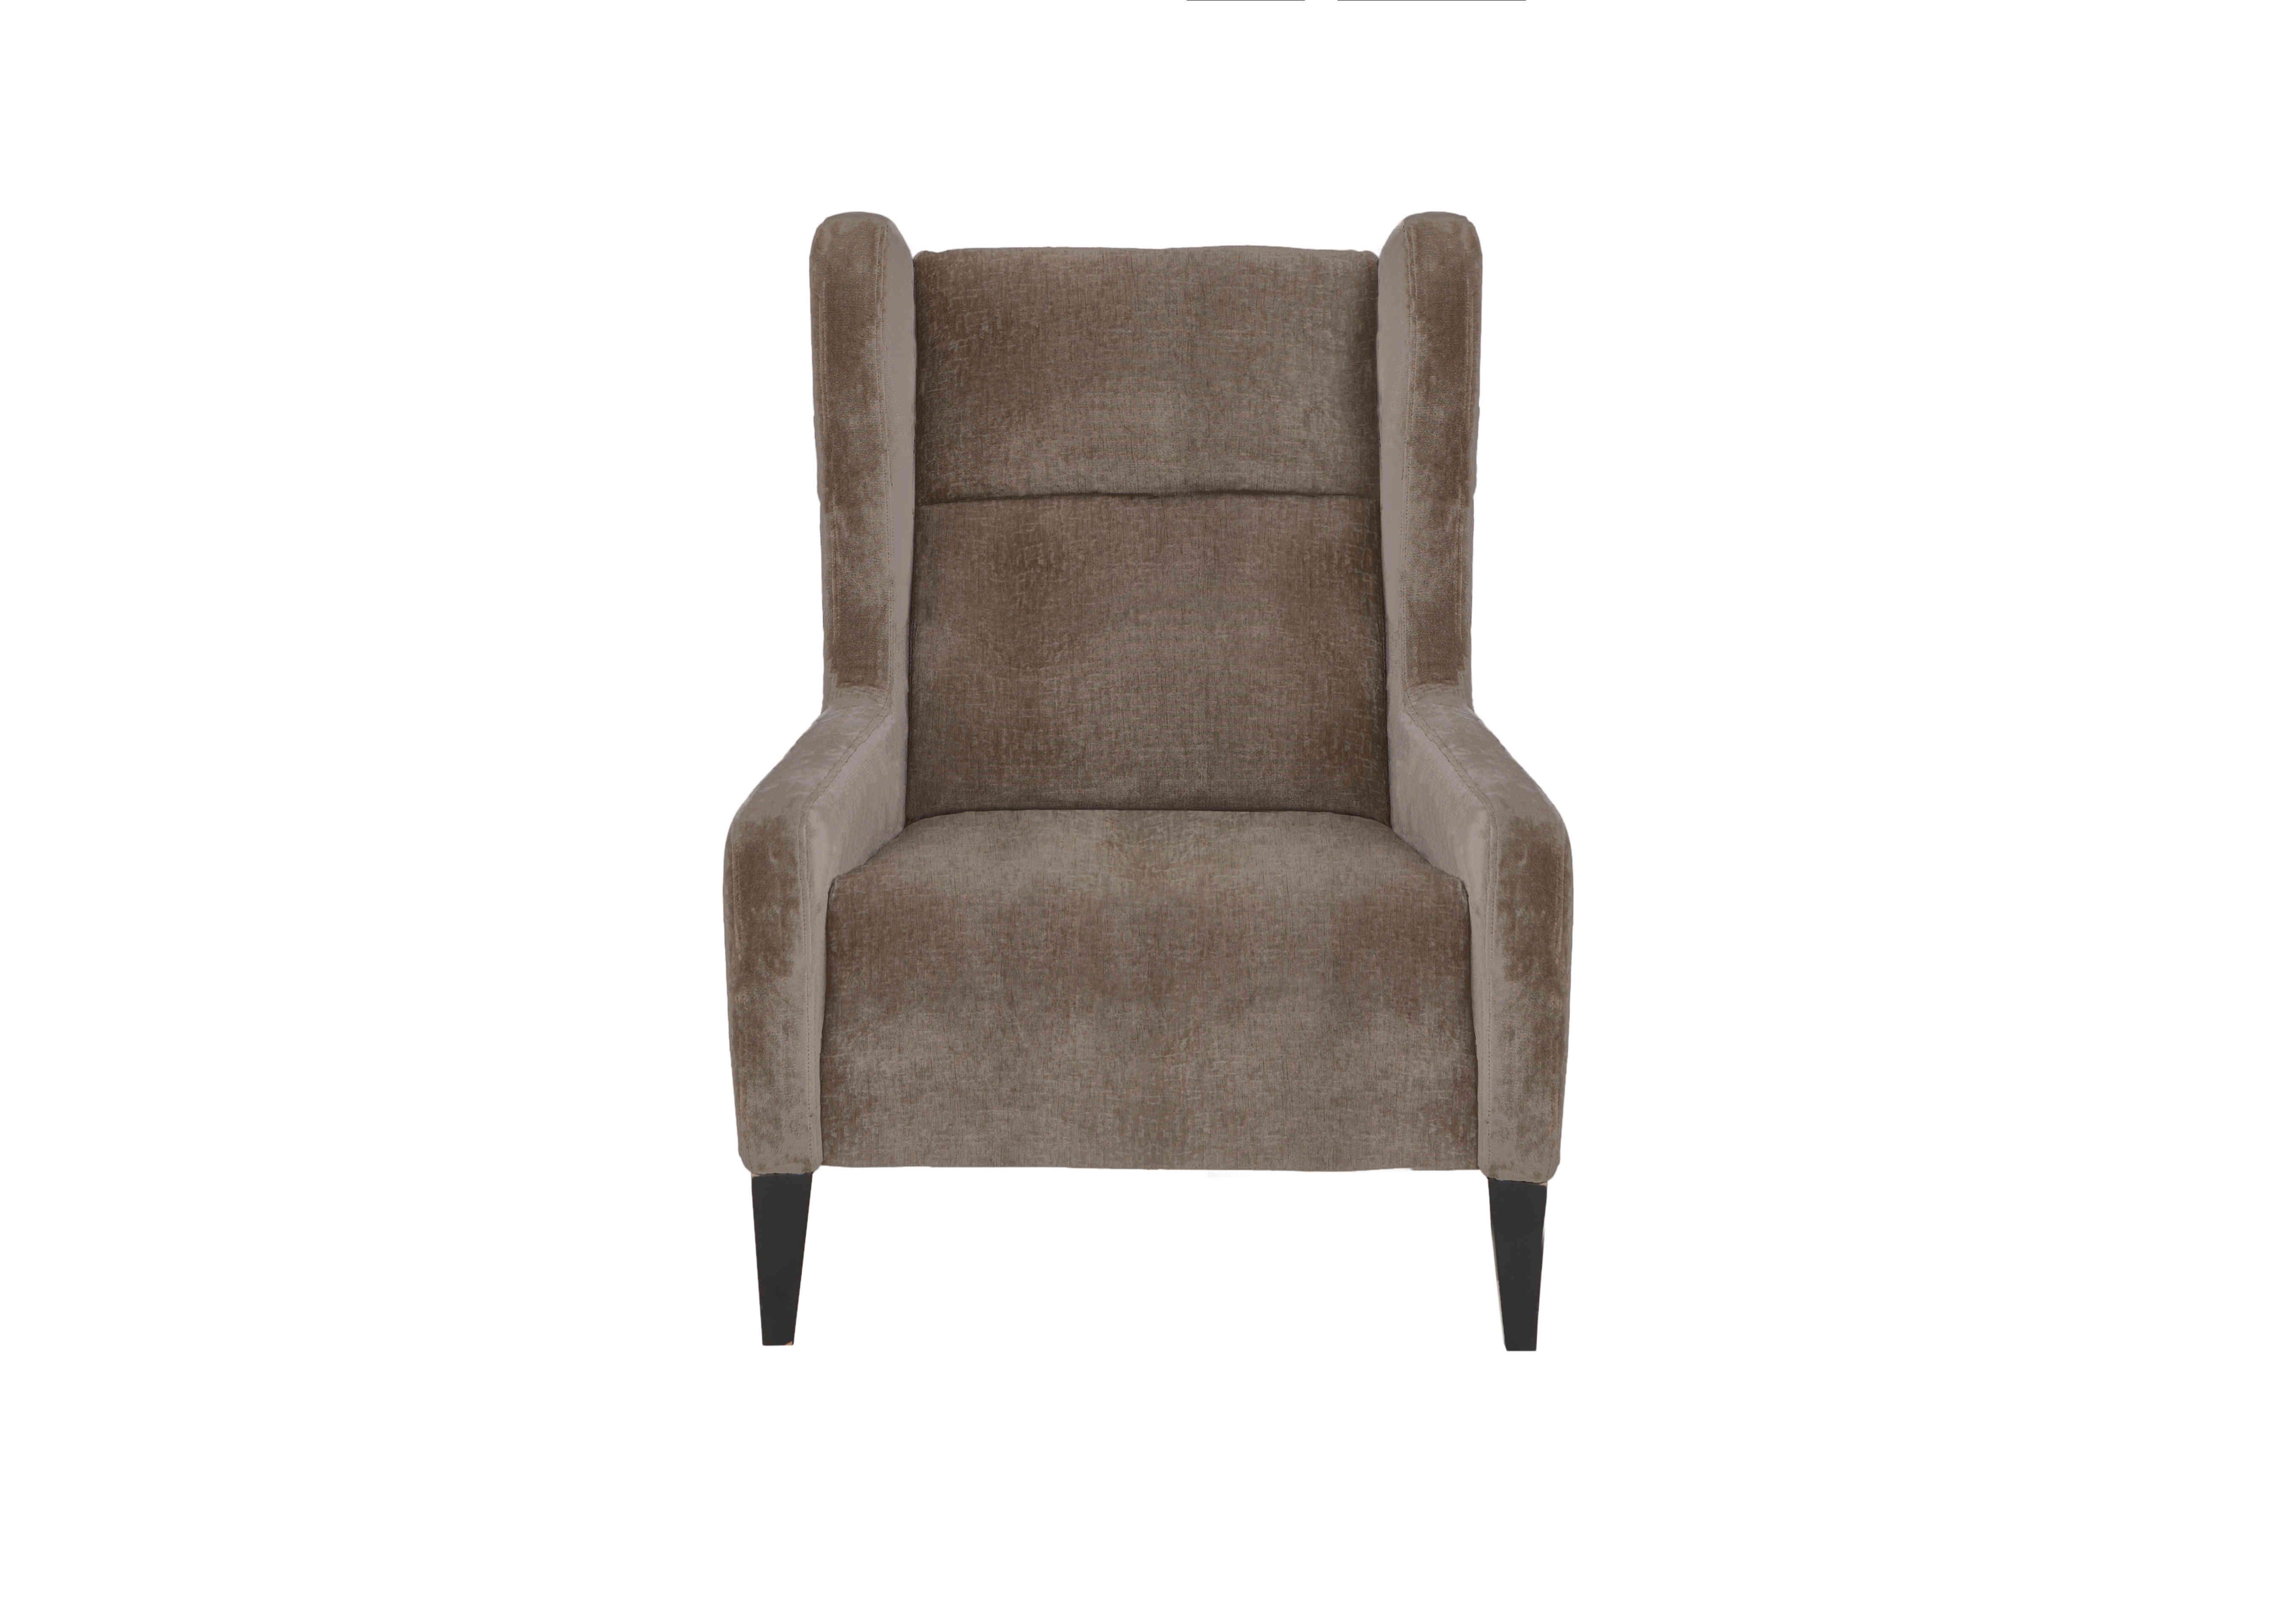 Boutique Lavish Fabric Wing Chair in Alexandra Coco on Furniture Village